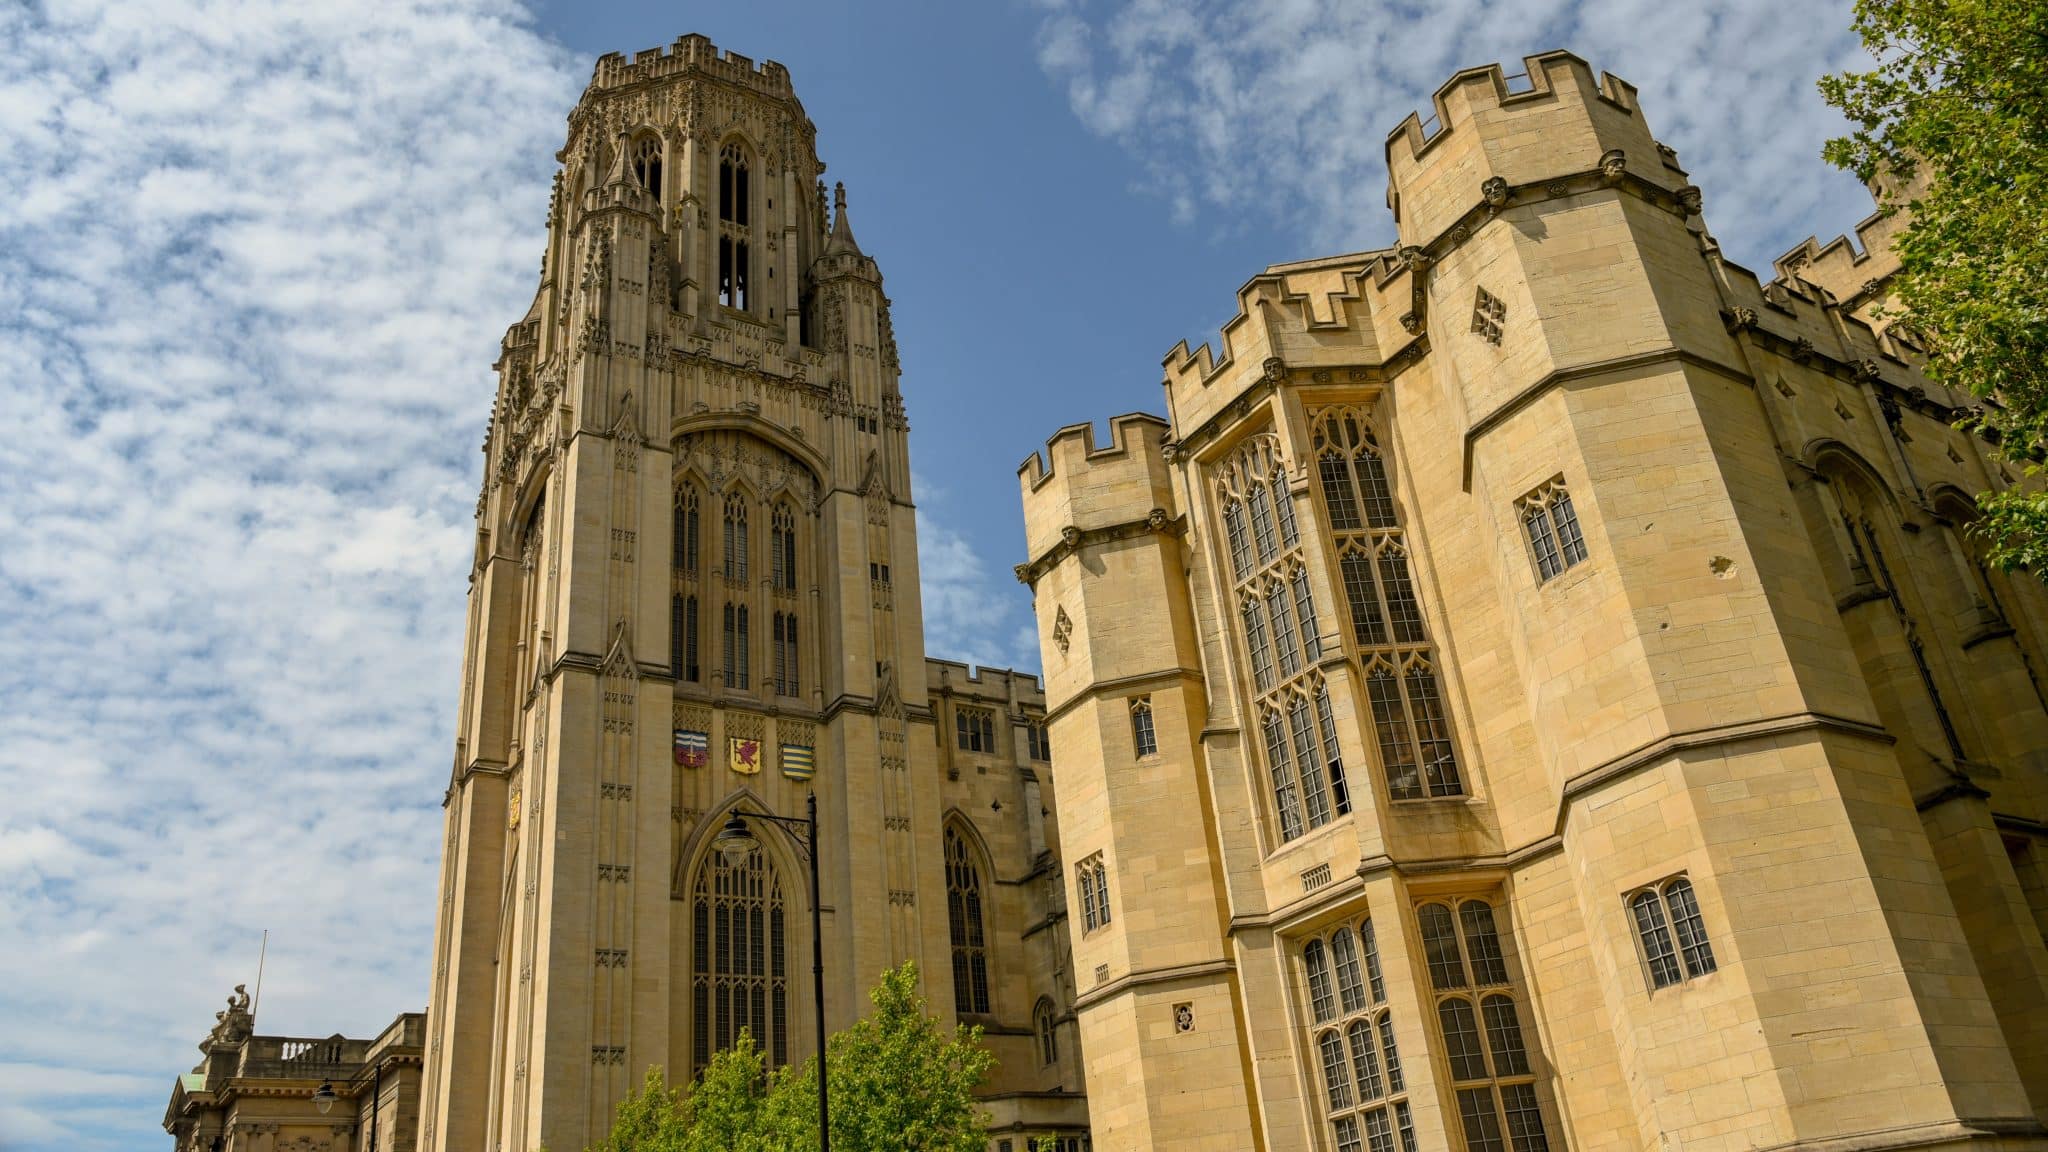 Wills Memorial Building in the Bristol University, one of the most beautiful buildings in Bristol